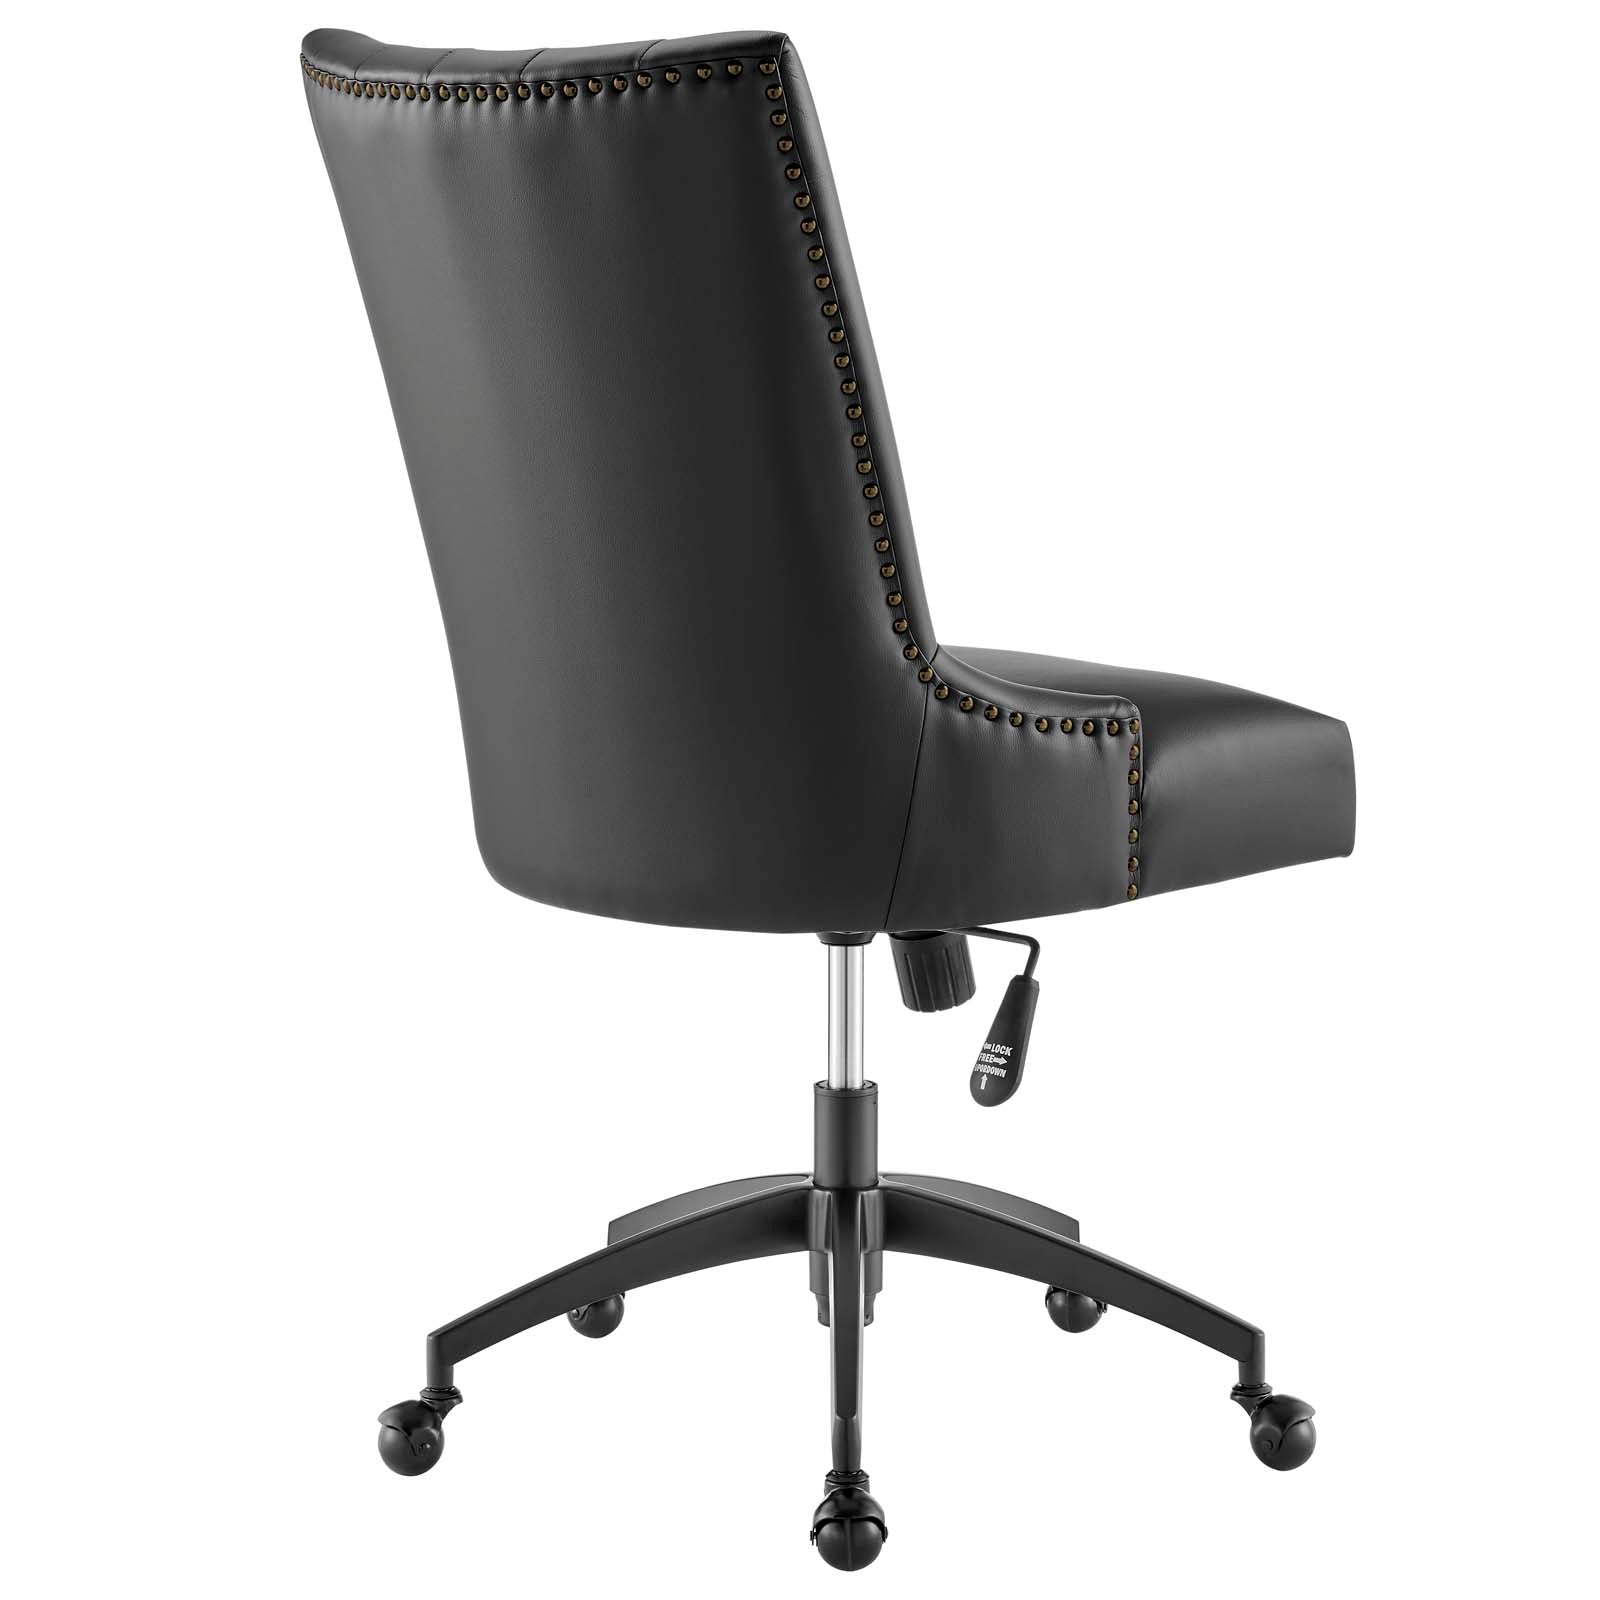 Modway Task Chairs - Empower Channel Tufted Vegan Leather Office Chair Black Black